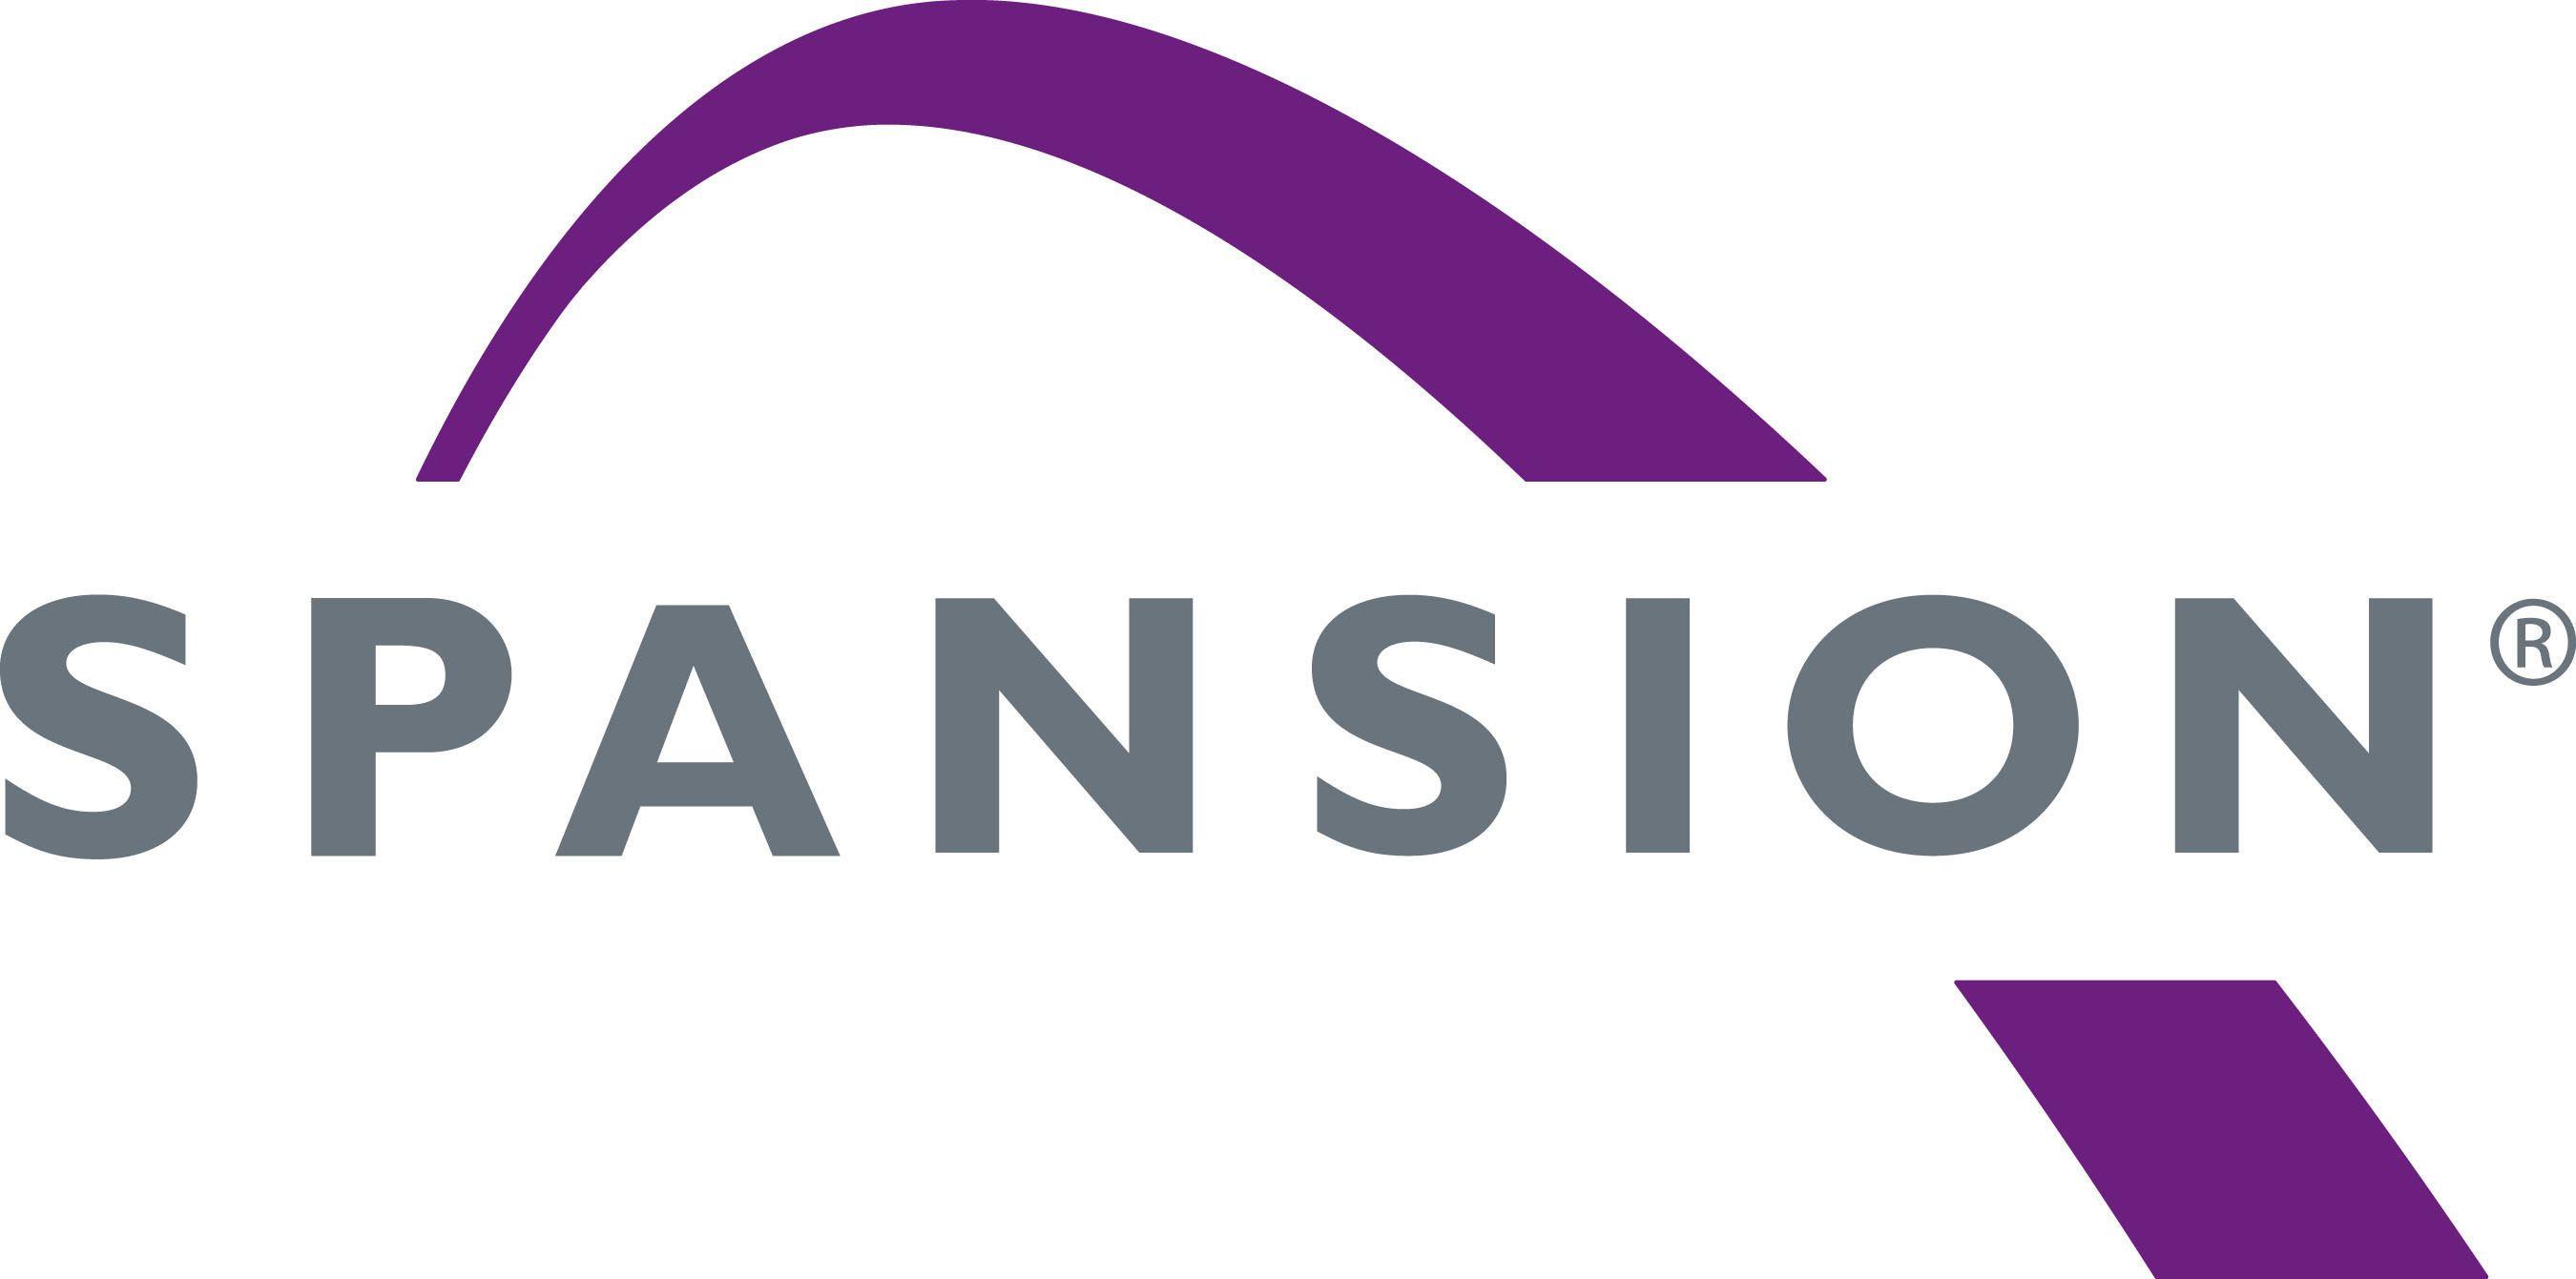 Spansion Logo - Cypress and Spansion to Merge in $4 Billion All-Stock Transaction